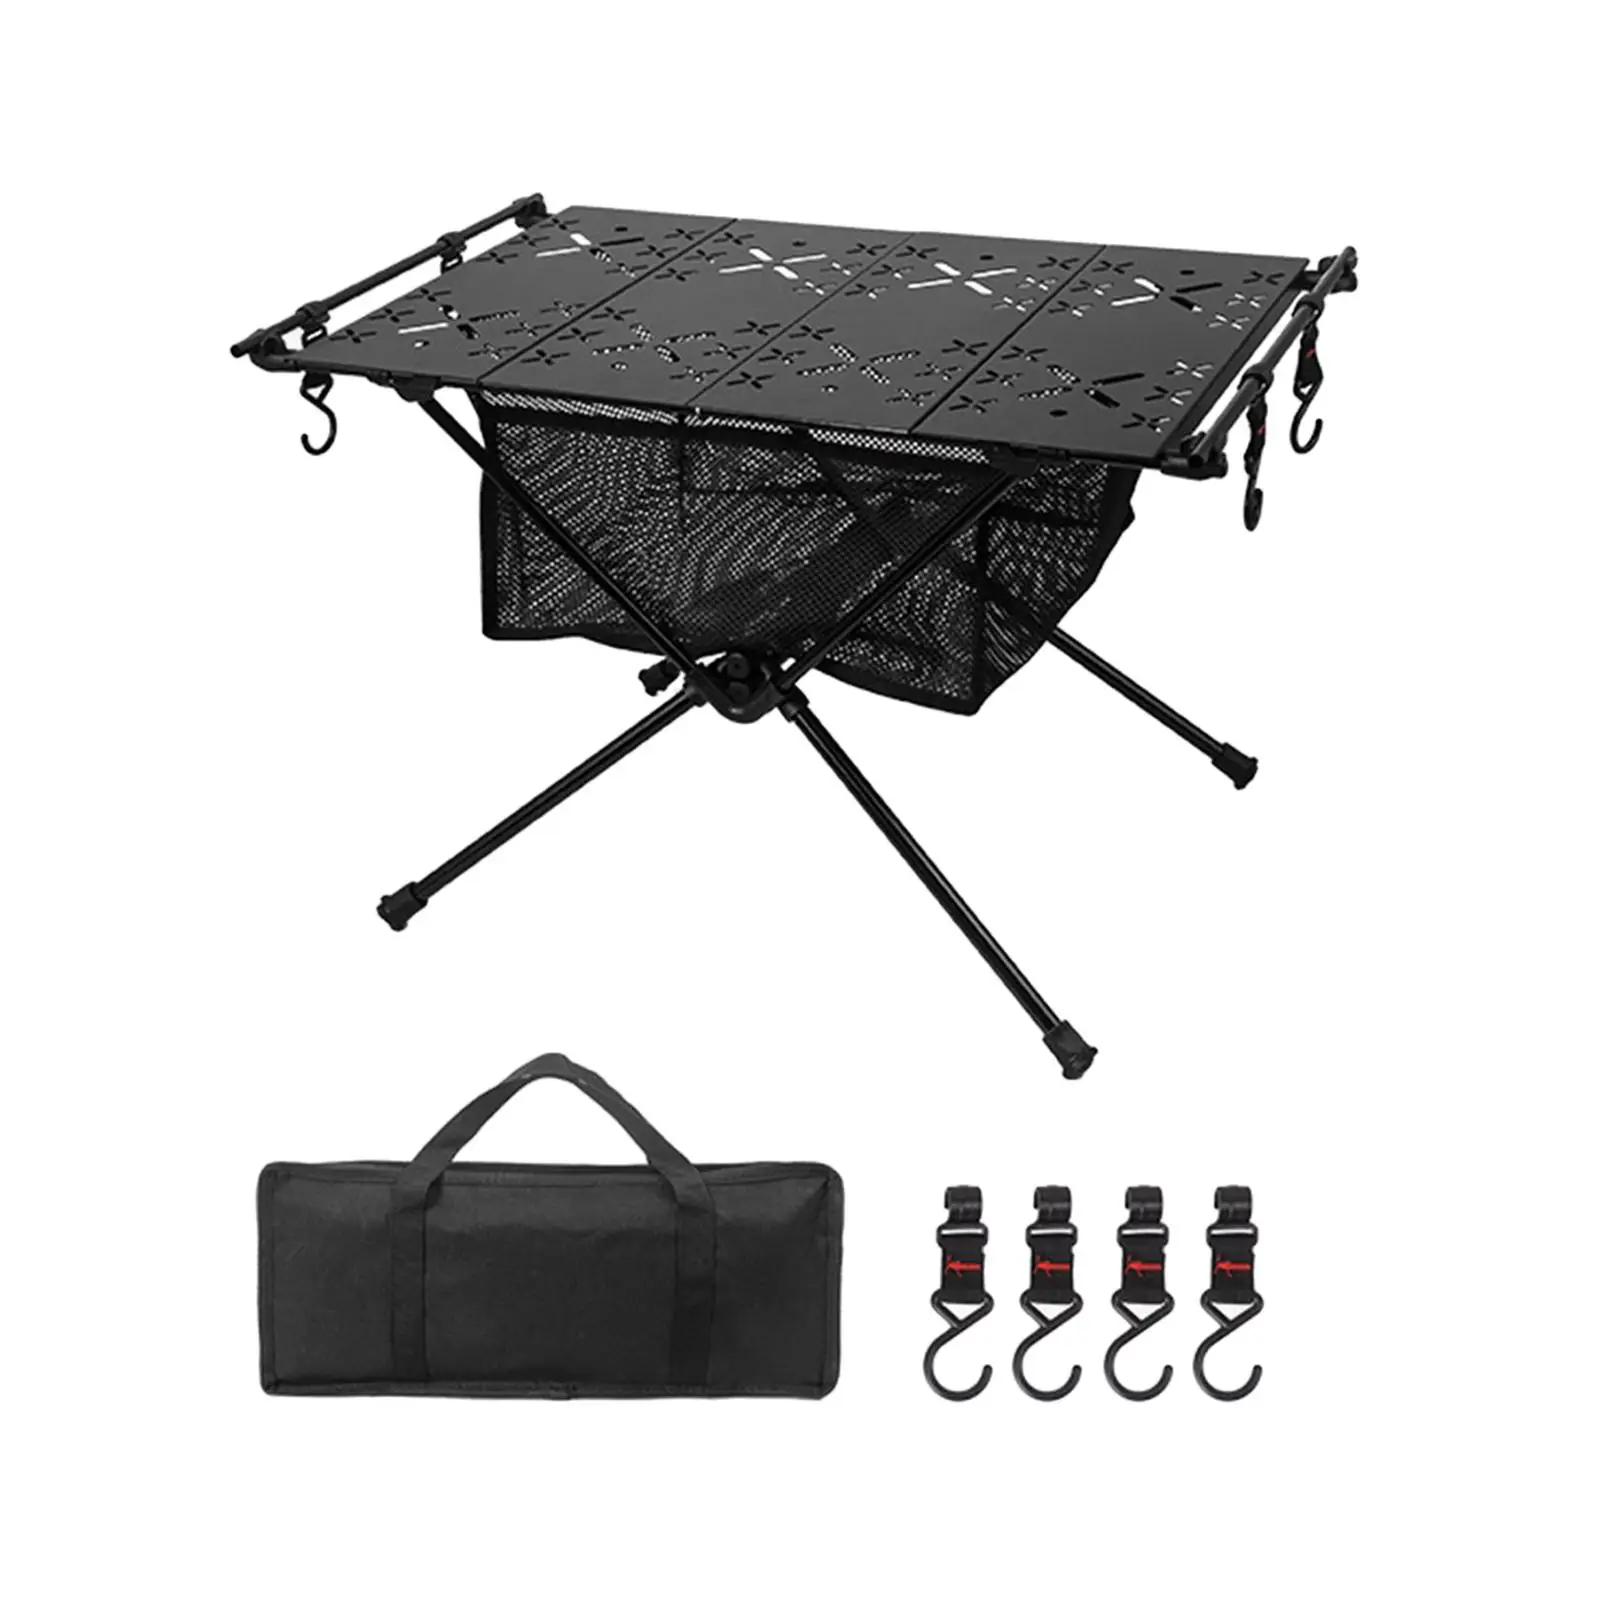 Foldable Camping Table Aluminum Alloy Outdoor Table Beach Table Ultralight Desk for Garden Backpacking Backyard Yard BBQ